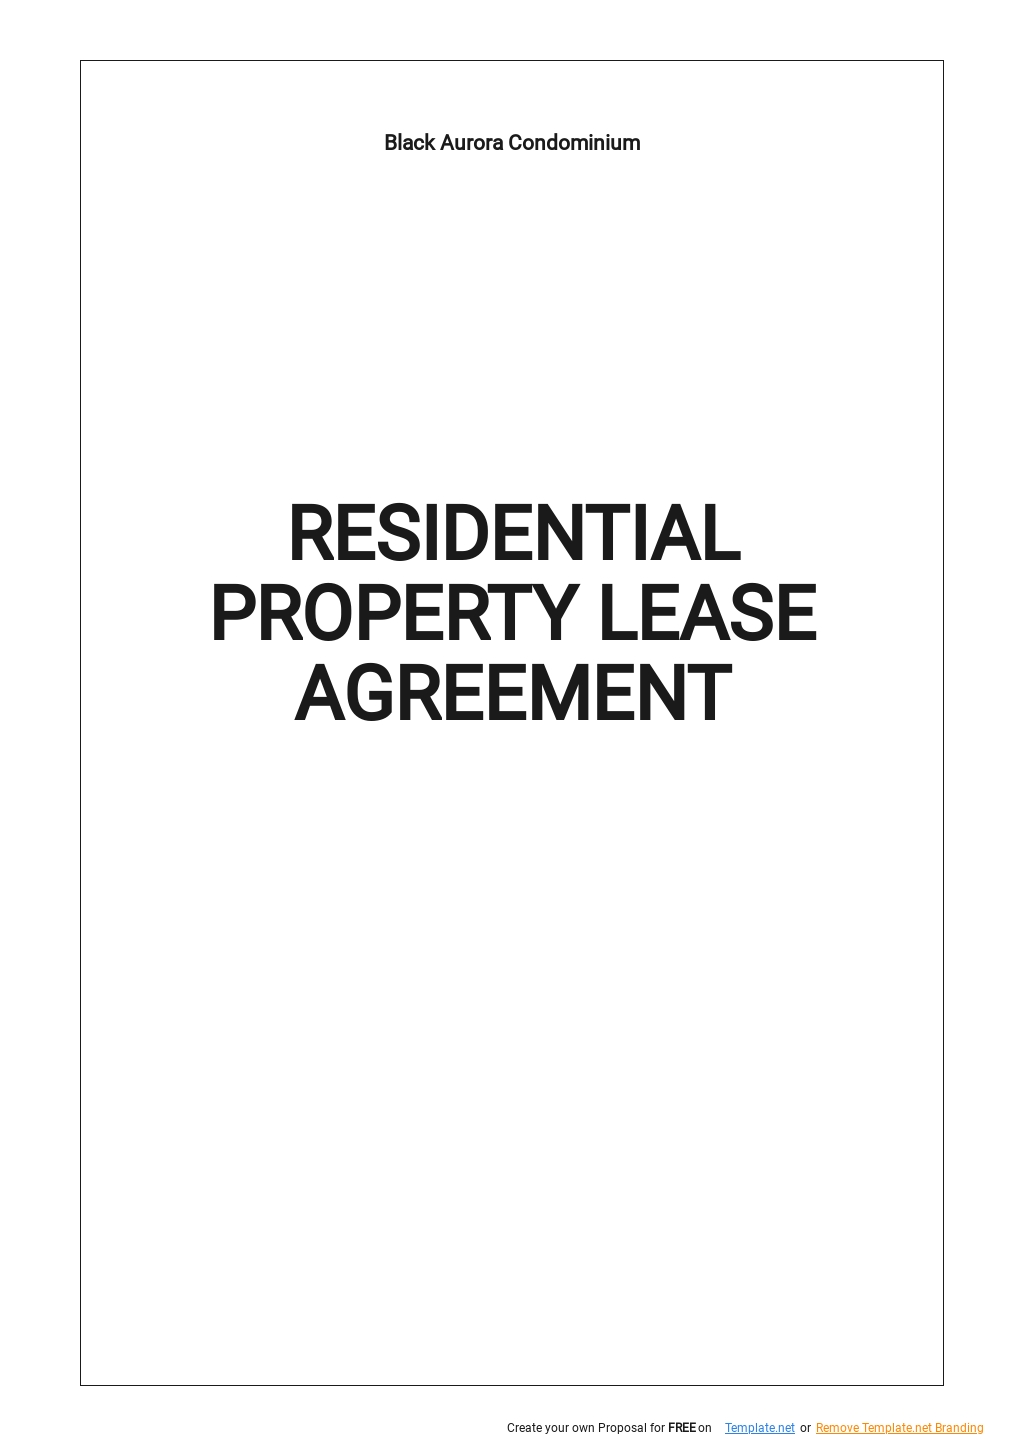 Residential Lease Agreement Templates Documents, Design, Free